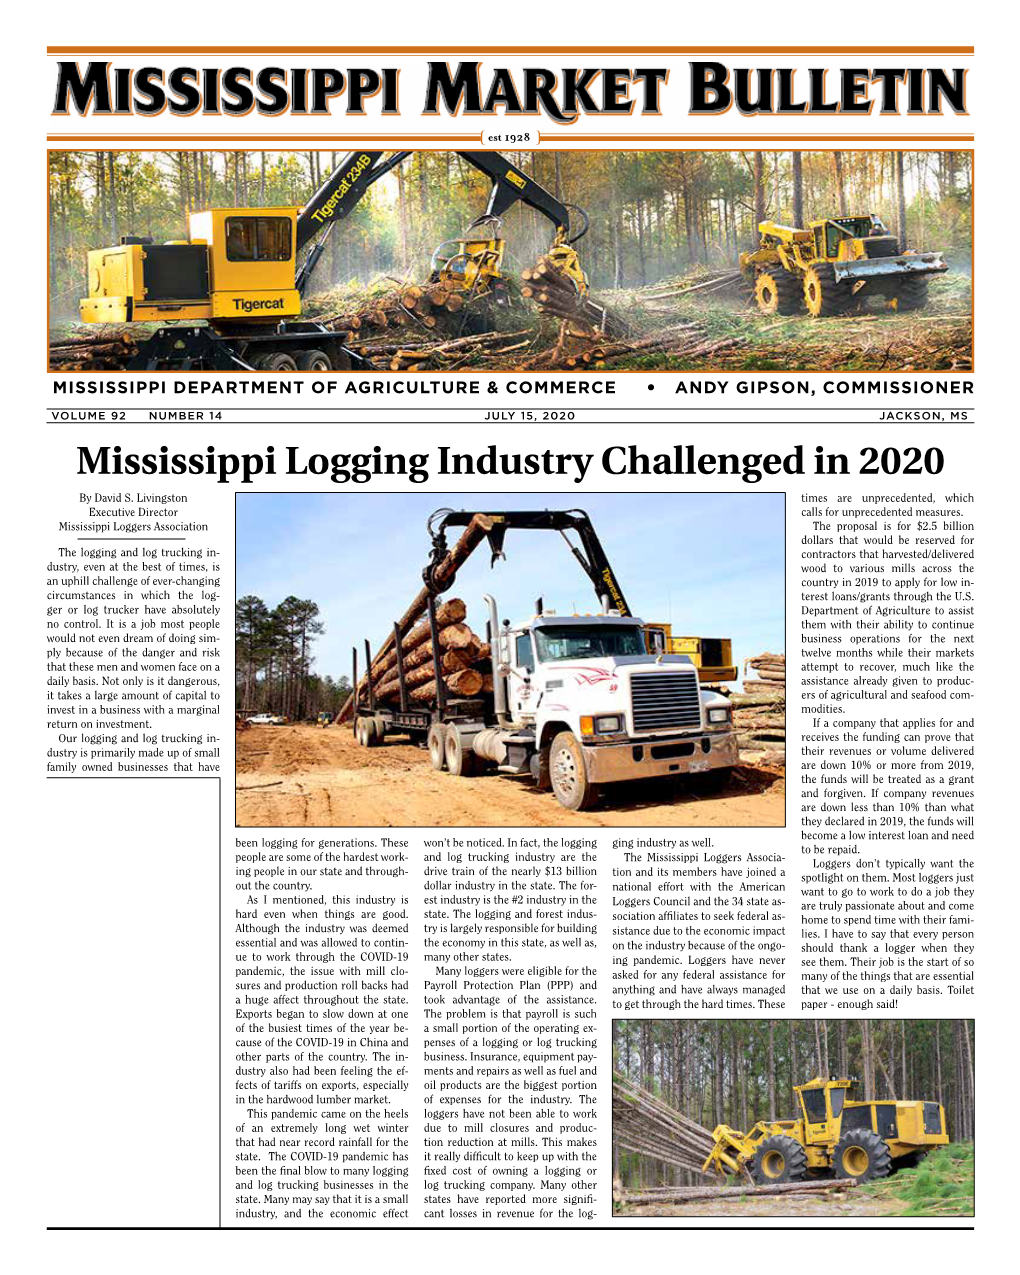 Mississippi Logging Industry Challenged in 2020 by David S